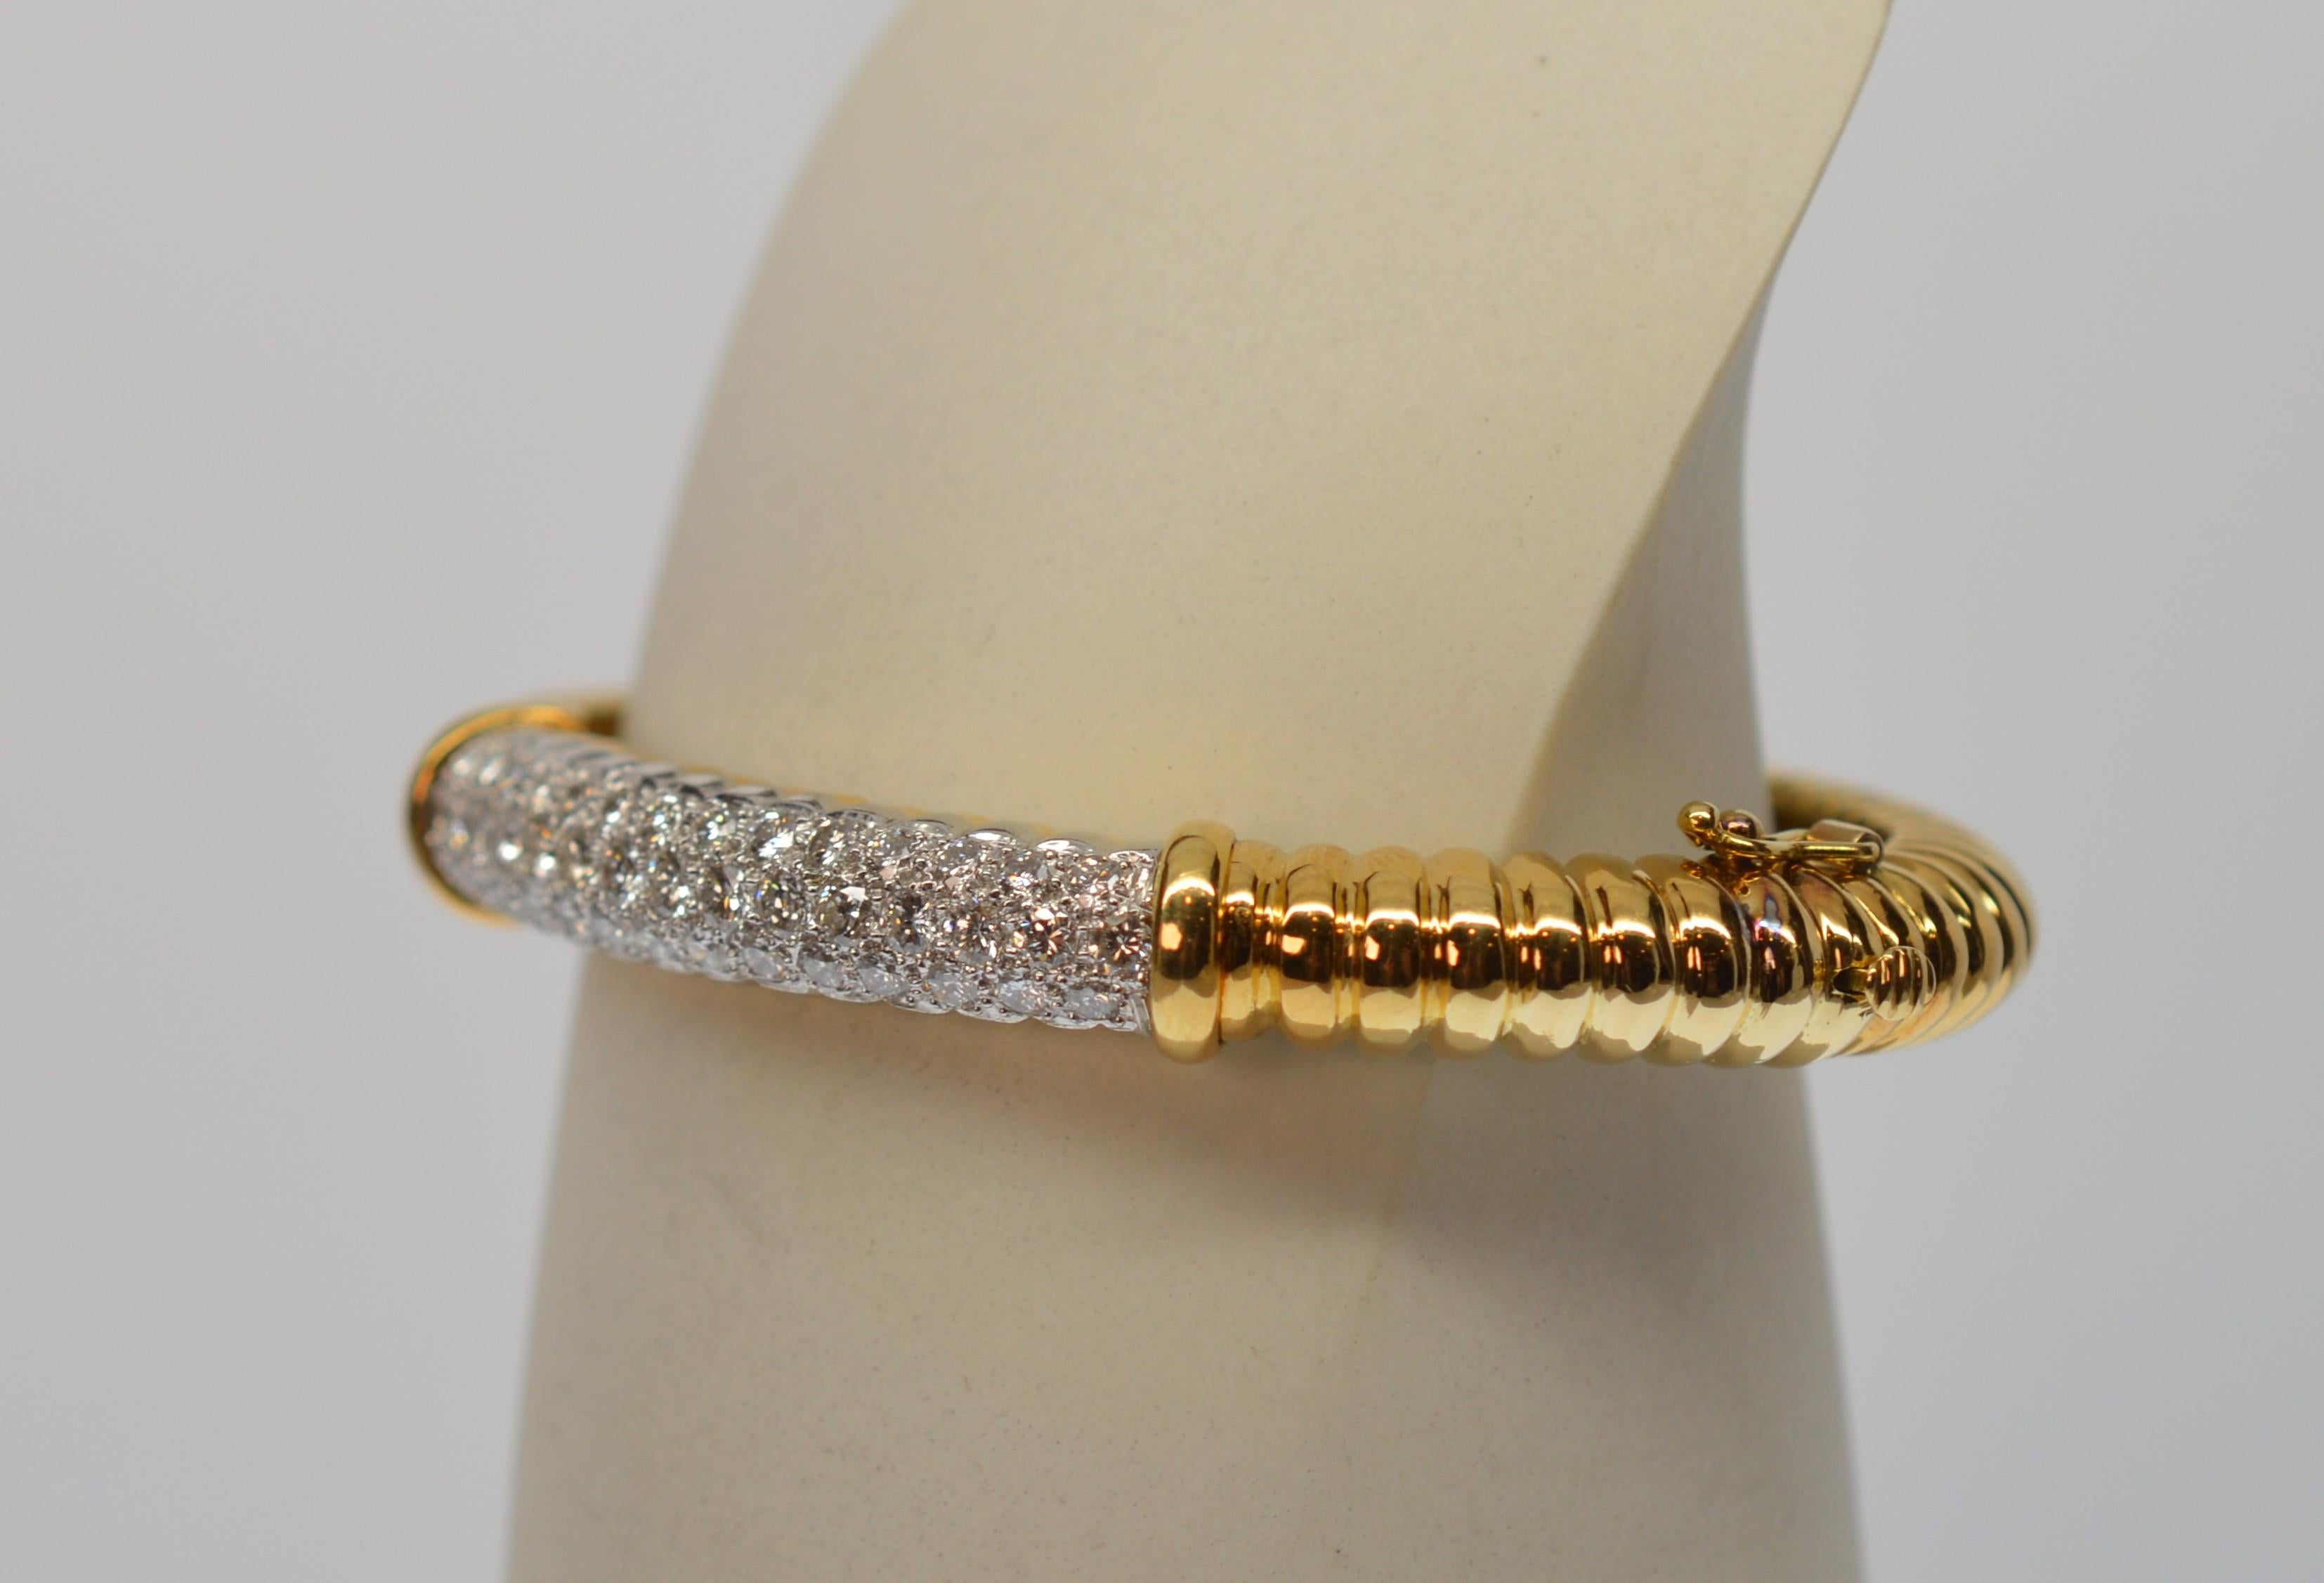 Impressive, finely constructed eighteen karat yellow gold bangle bracelet is stunning with well over an inch of bright white diamond inlaid across the front placket . The band, measuring 2-1/4 x 1-3/4 inches inside, is a rope design that creates